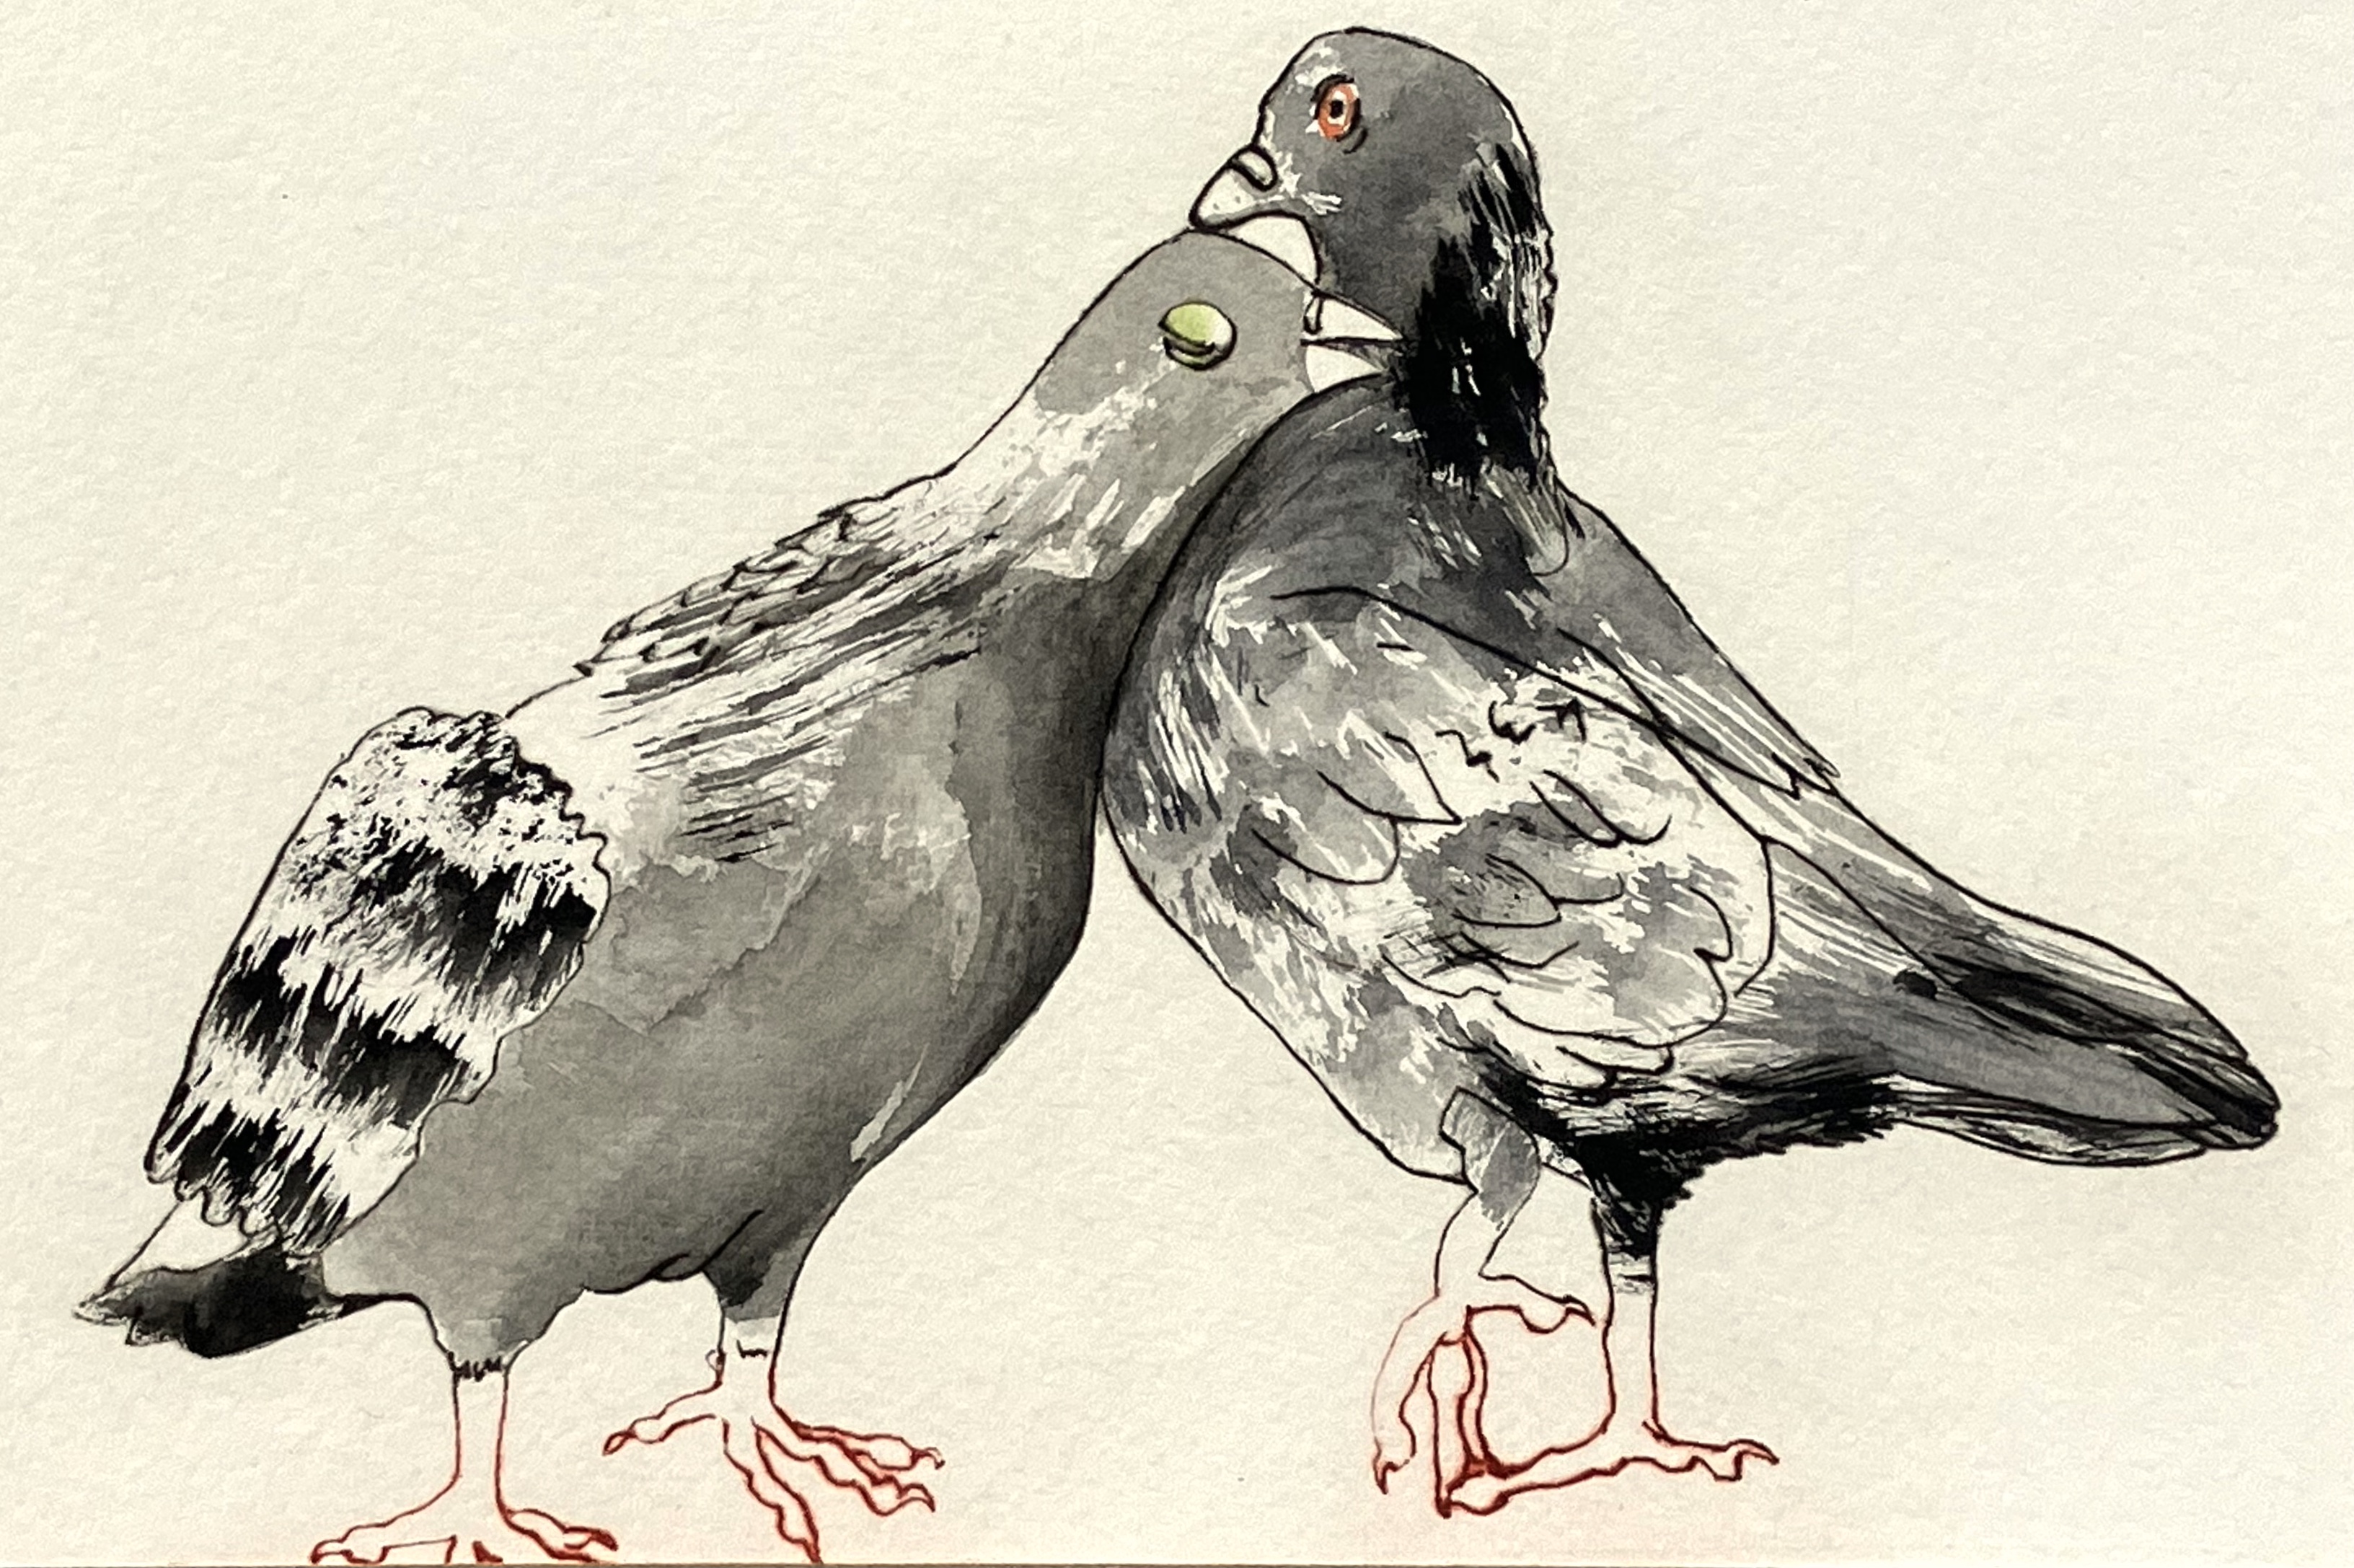 painting of two affectionate pigeons